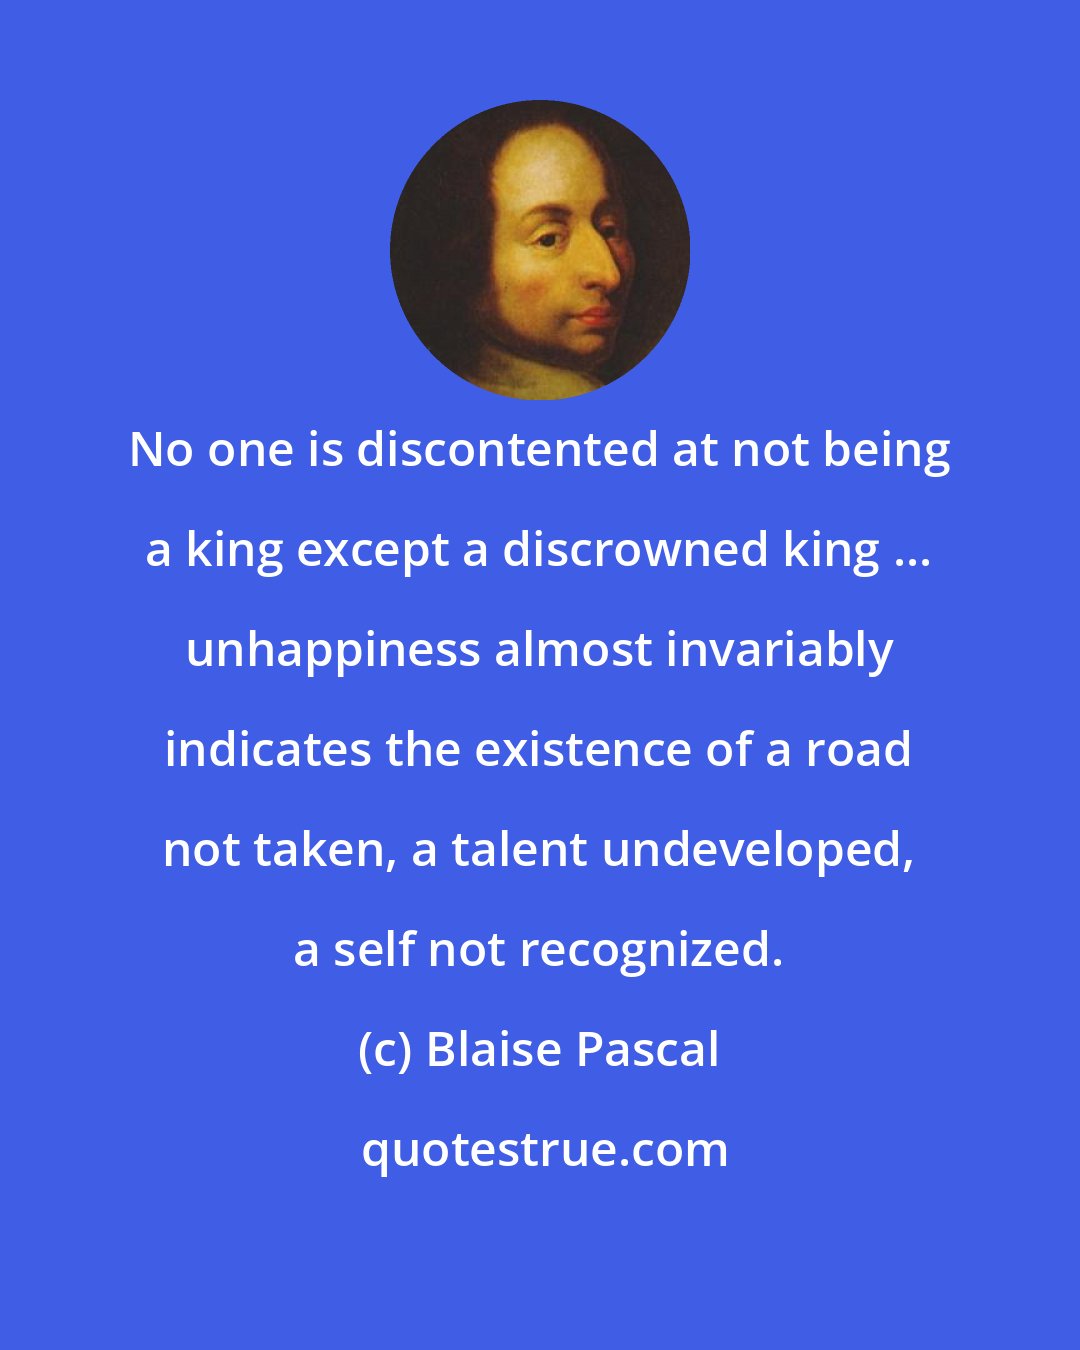 Blaise Pascal: No one is discontented at not being a king except a discrowned king ... unhappiness almost invariably indicates the existence of a road not taken, a talent undeveloped, a self not recognized.